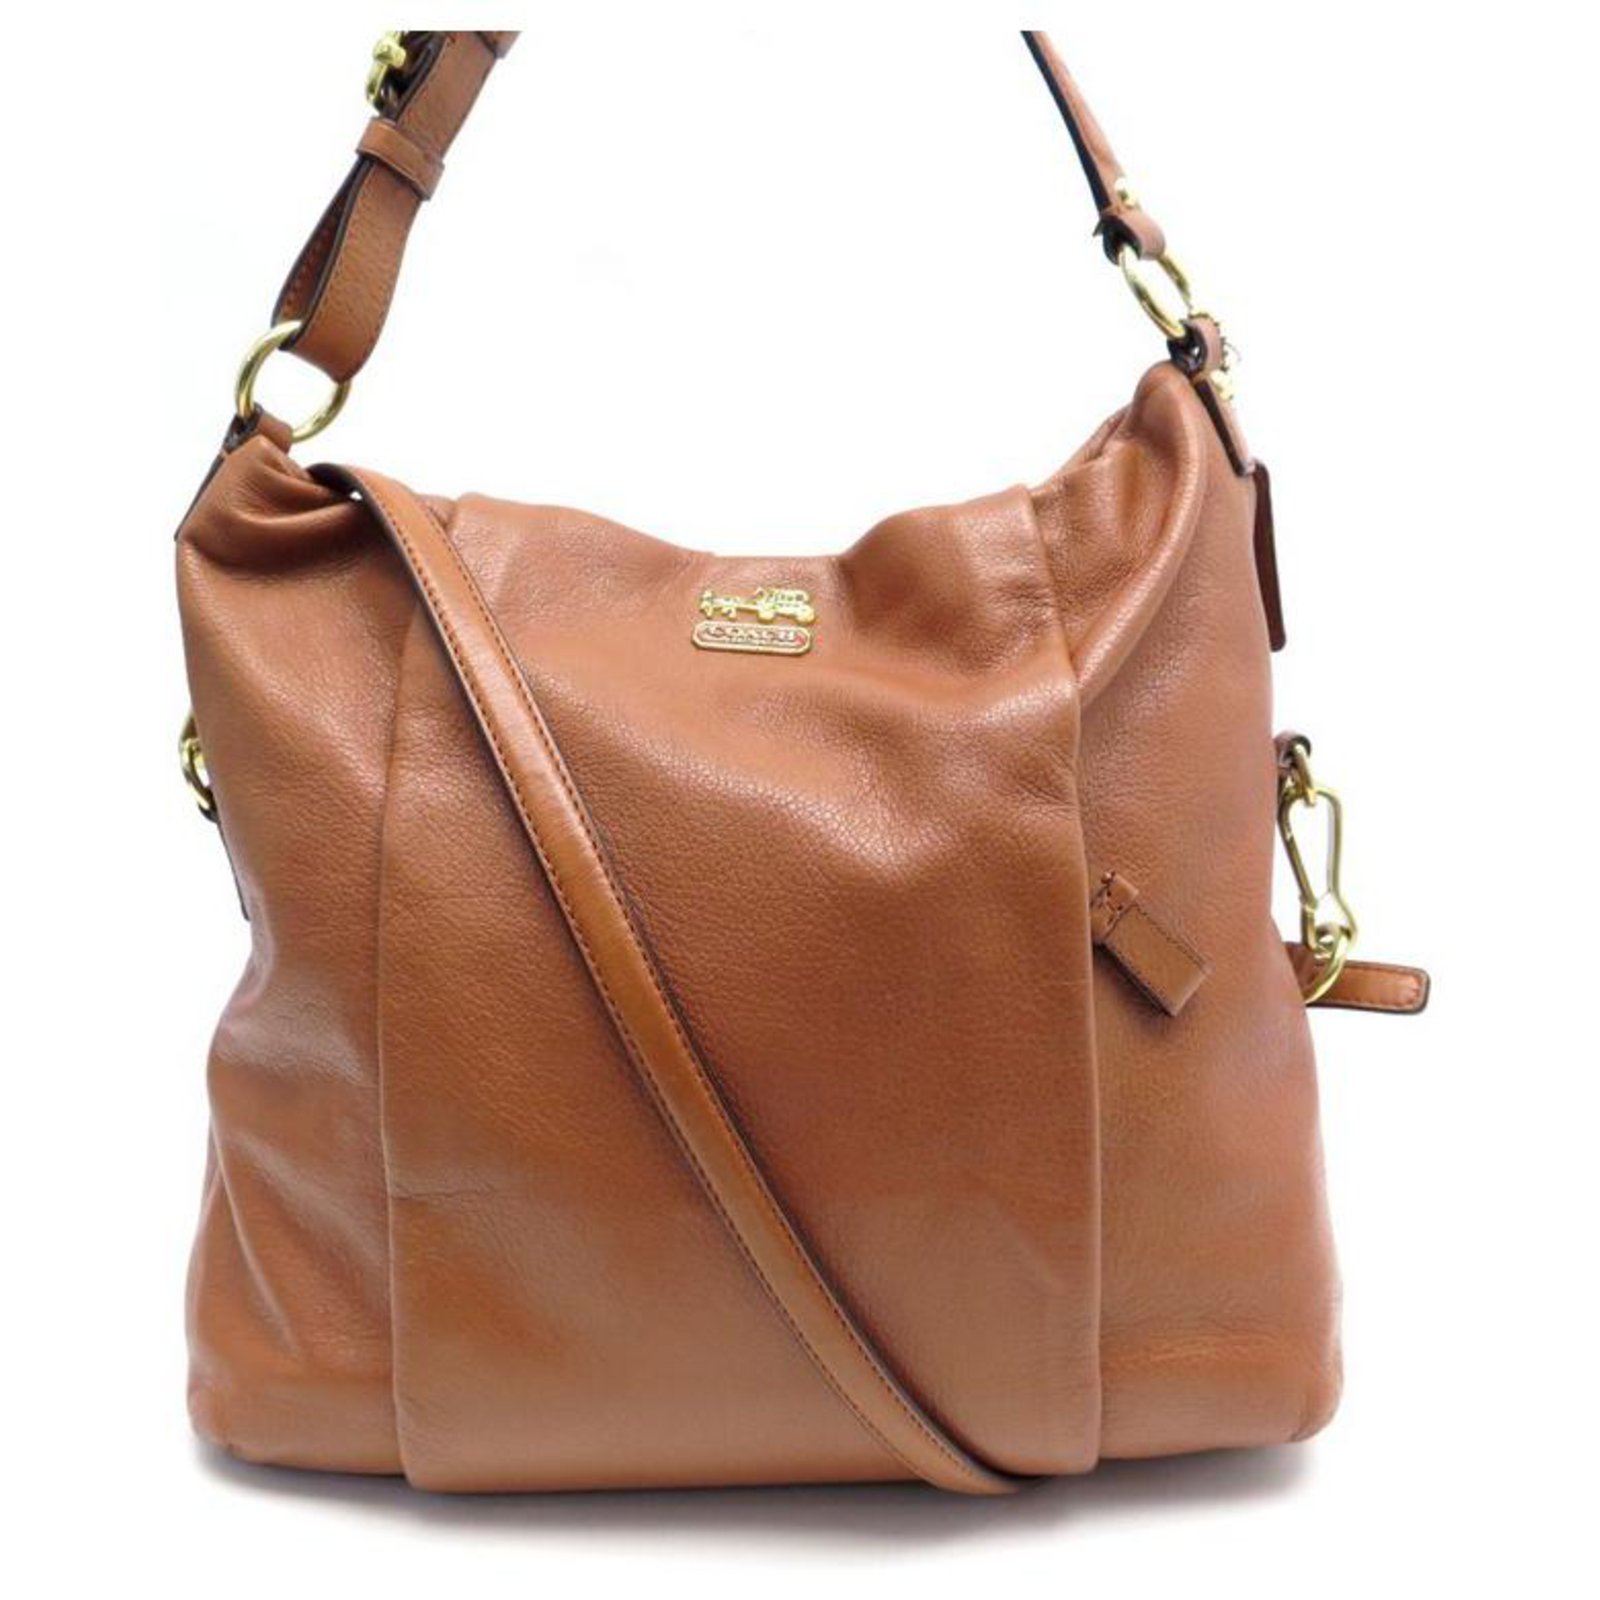 HANDBAG COACH TOTE BANDOULIERE IN BROWN LEATHER HAND BAG PURSE ref